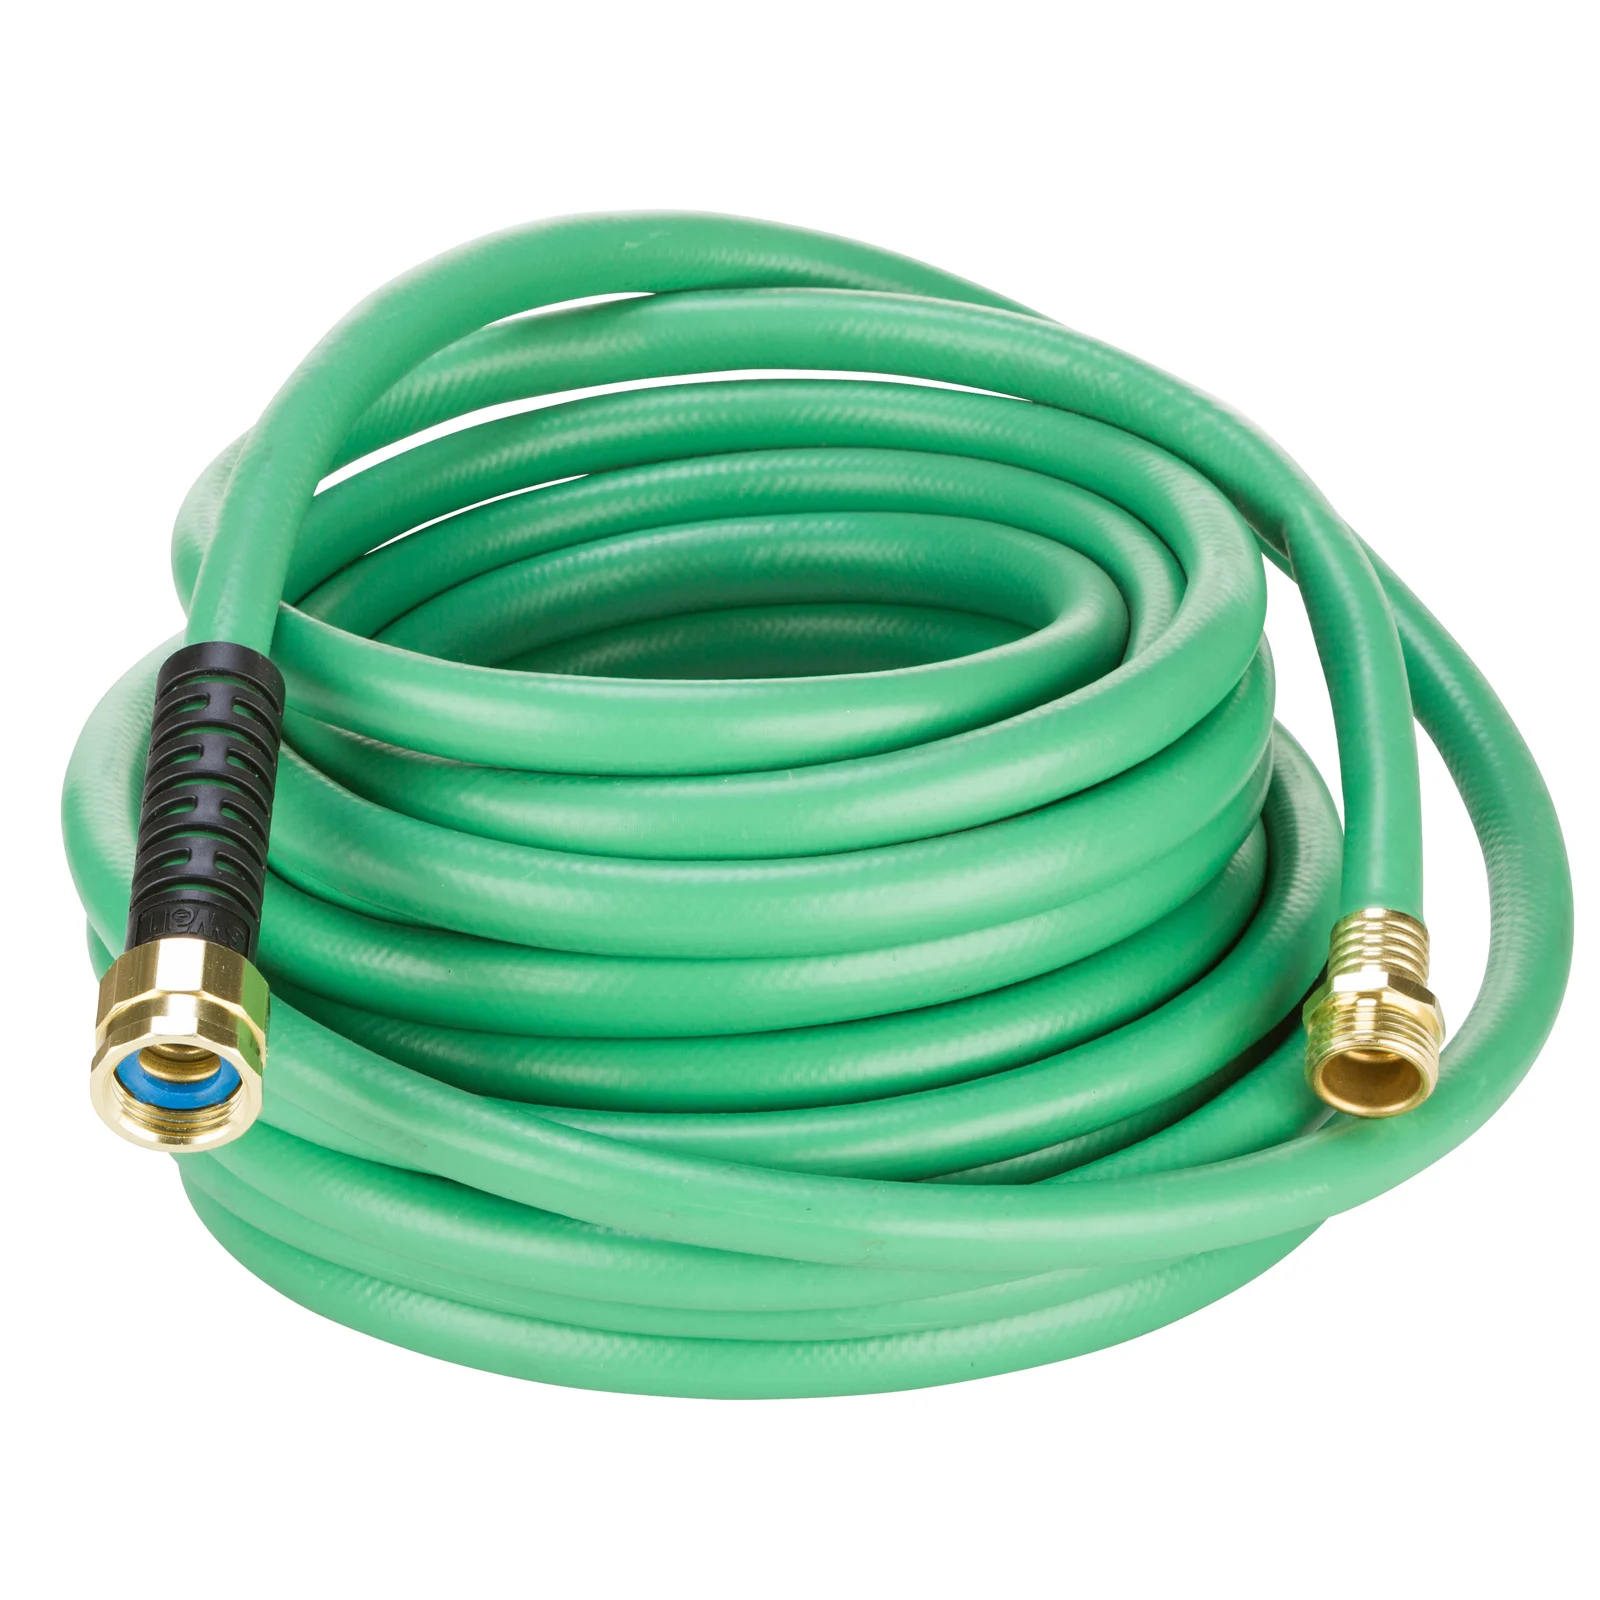 Here's How to Choose the Right Hose and Sprinkler for Your Lawn & Garden